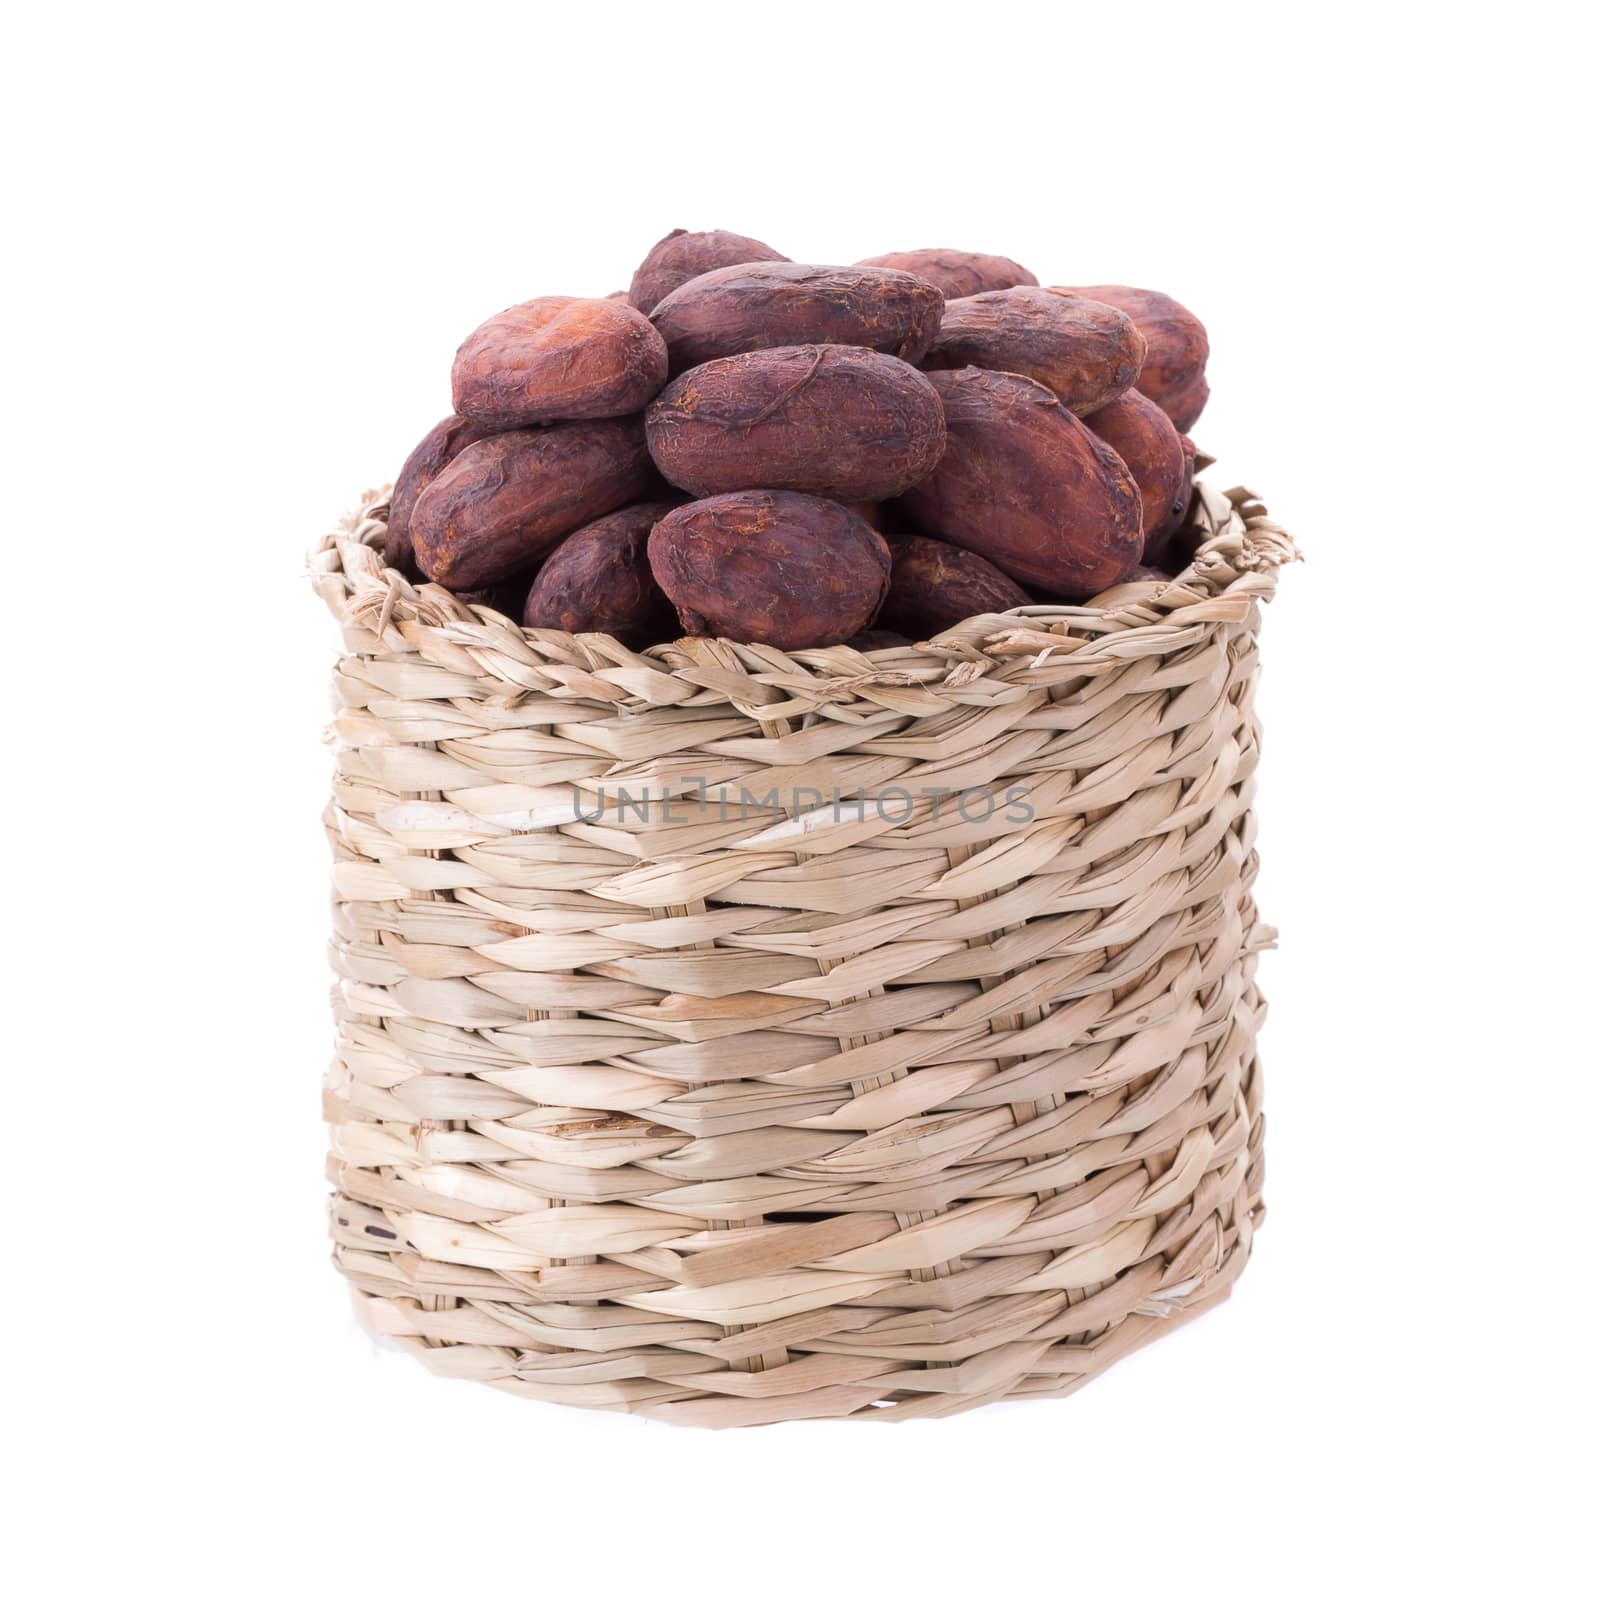 Cacao beans in basket isolated on white backgroun by kaiskynet